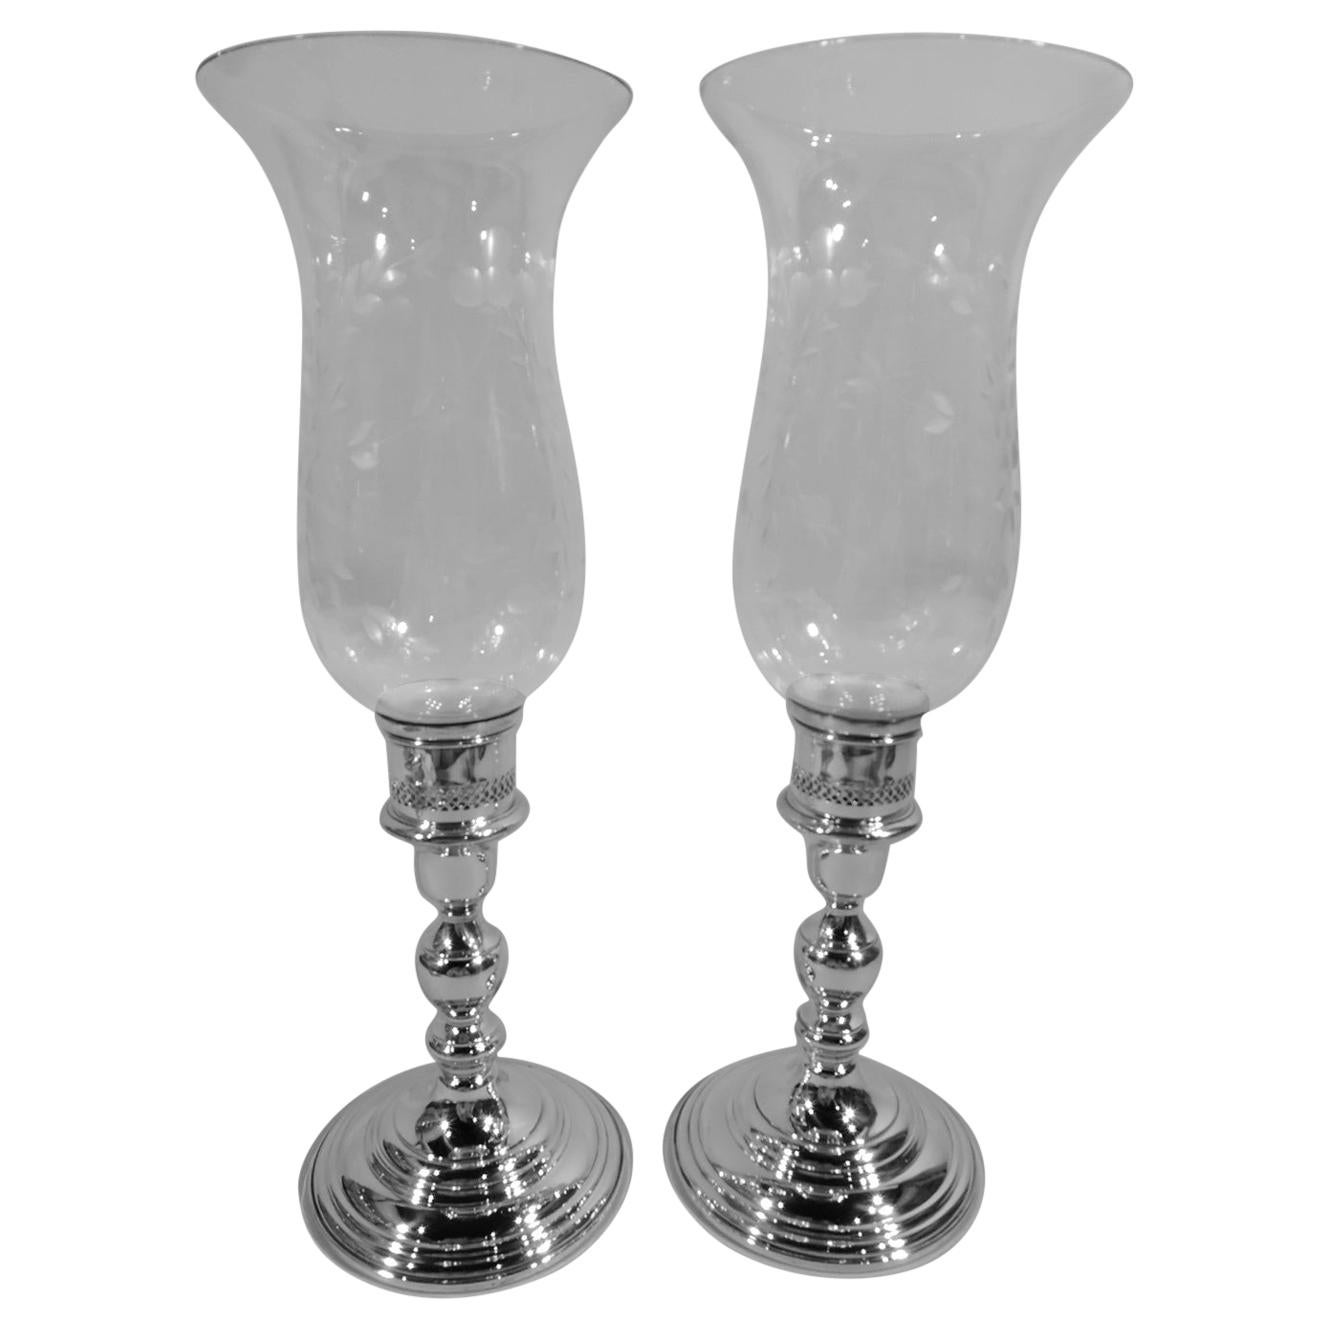 Pair of Cartier American Sterling Silver and Glass Hurricane Lamps